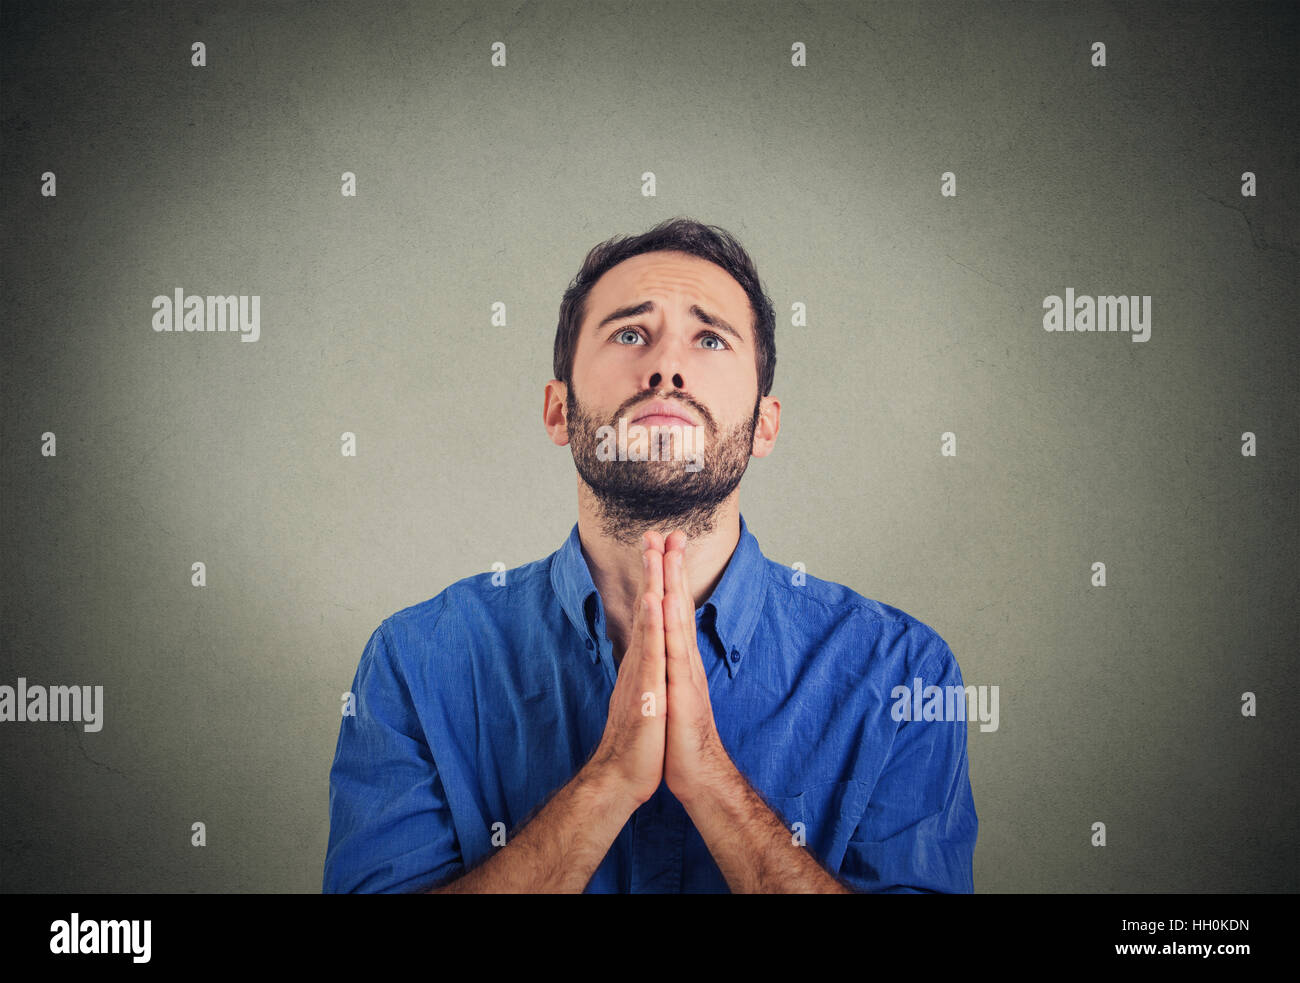 handsome young man praying hands clasped hoping for best asking forgiveness or miracle. Human emotion facial expression feeling Stock Photo